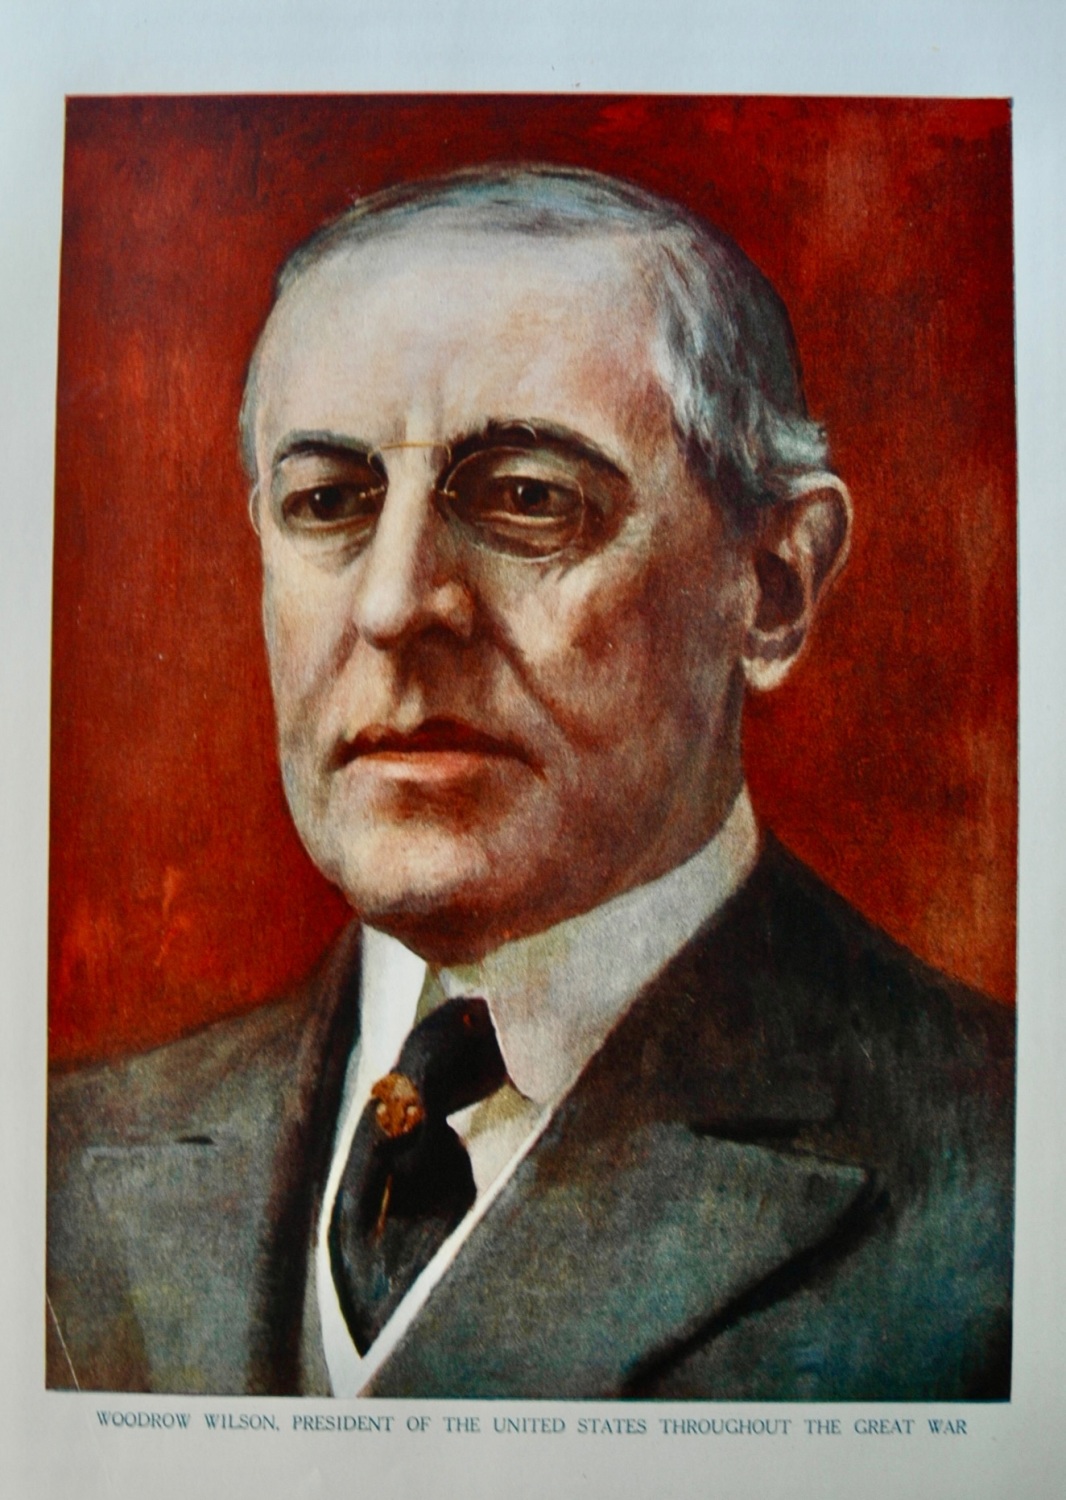 Woodrow Wilson, President of the United States throughout the Great War. (1